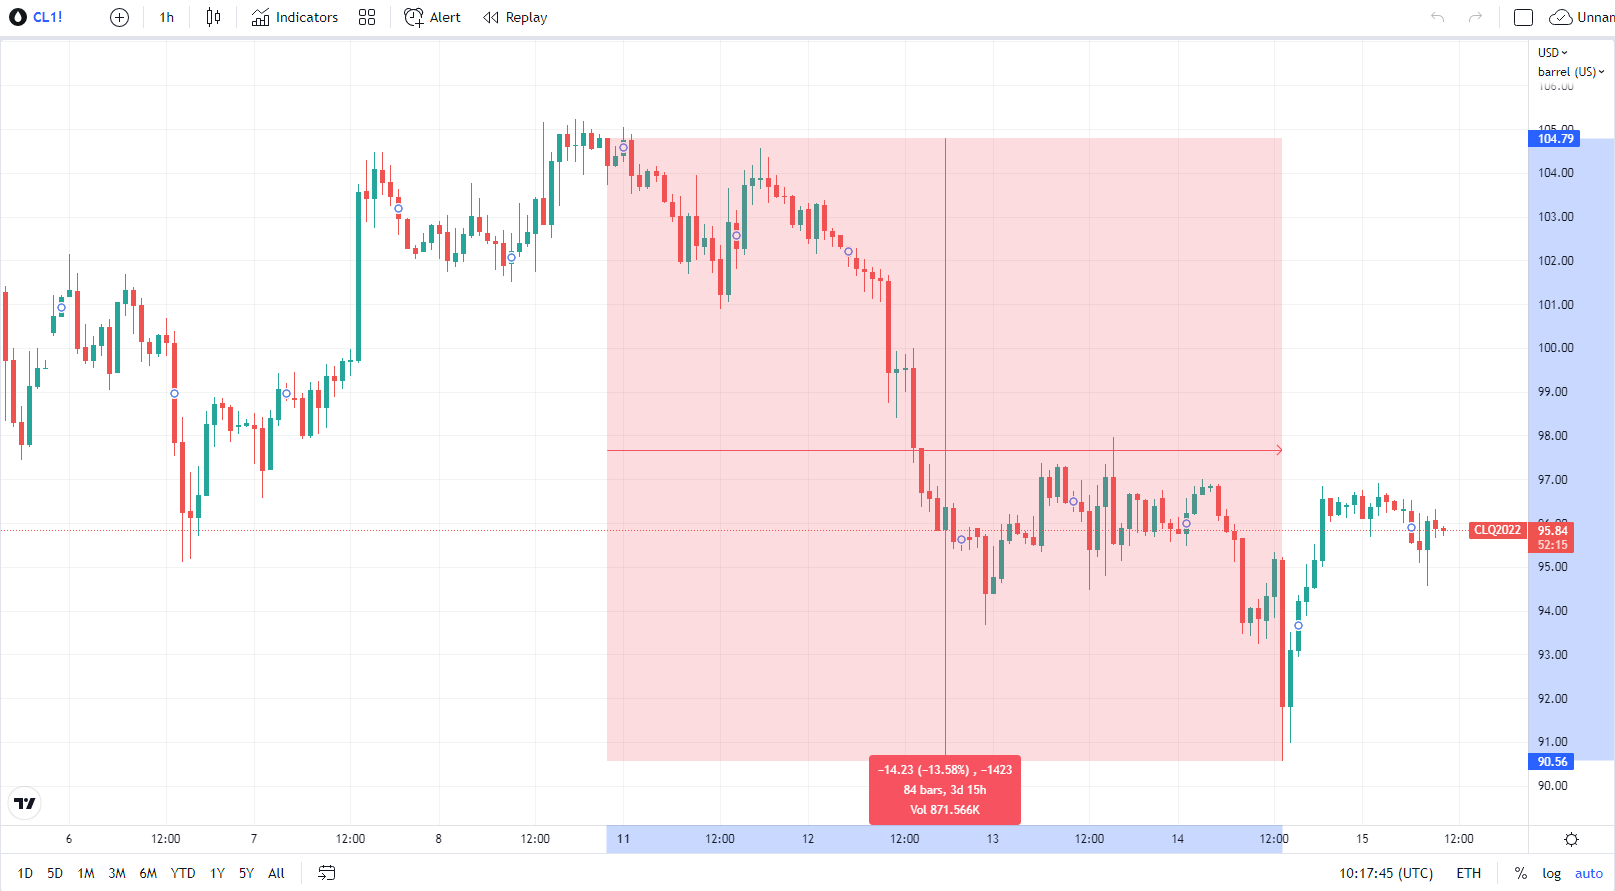 30 minutes chart of CL (Crude Oil Futures), Weekly development. Source: tradingview.com